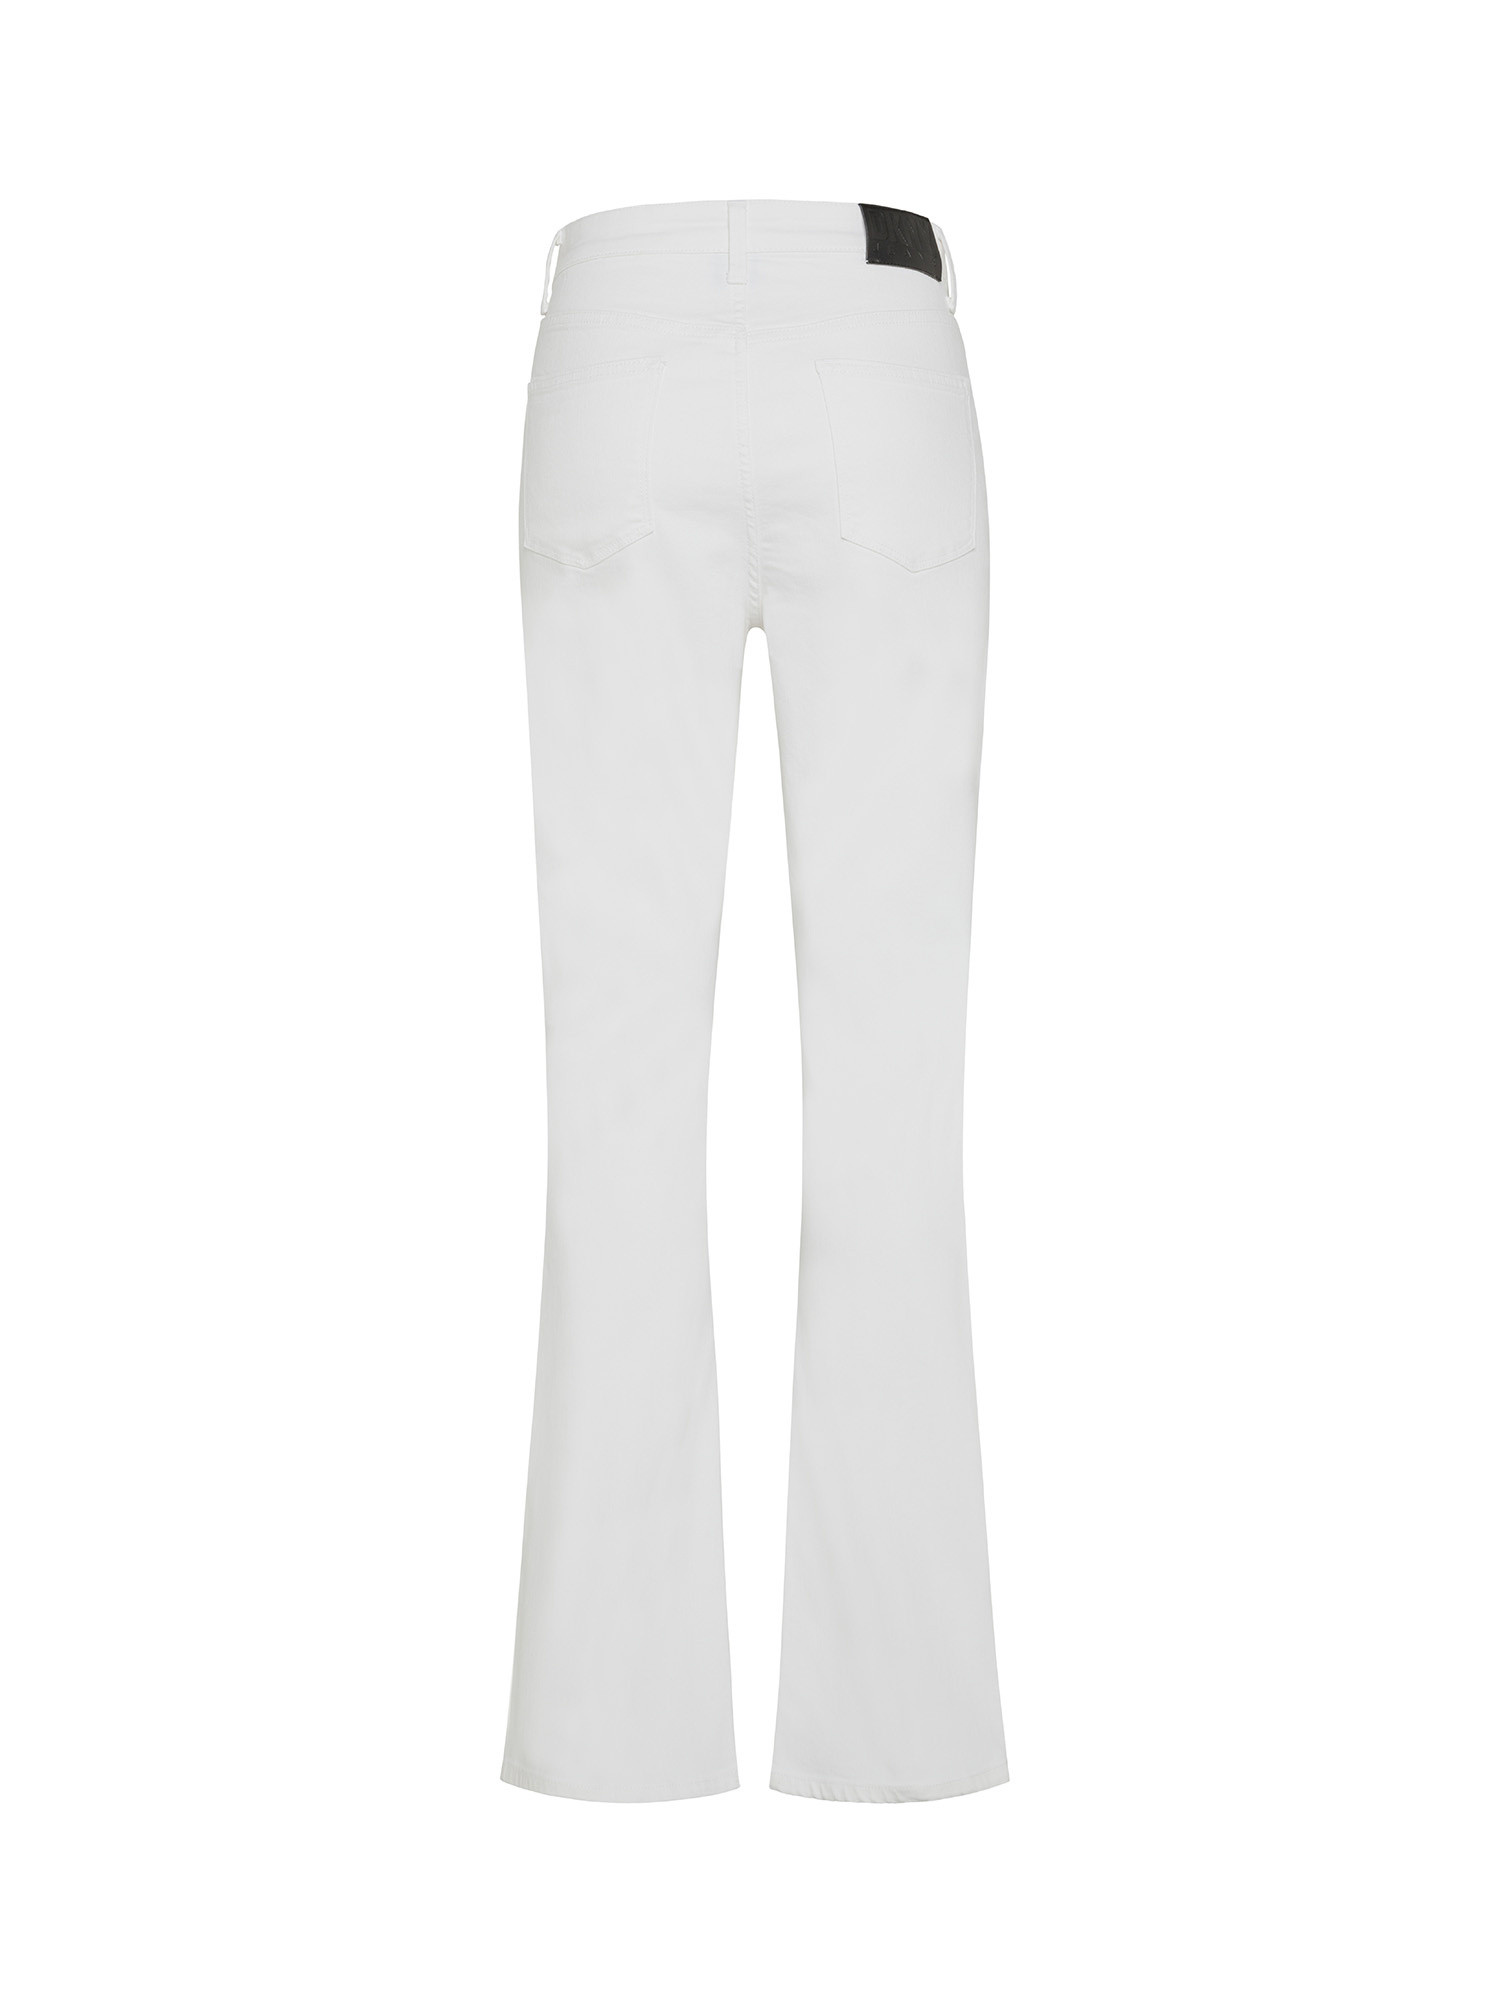 DKNY - High waist flaire jeans, White, large image number 1